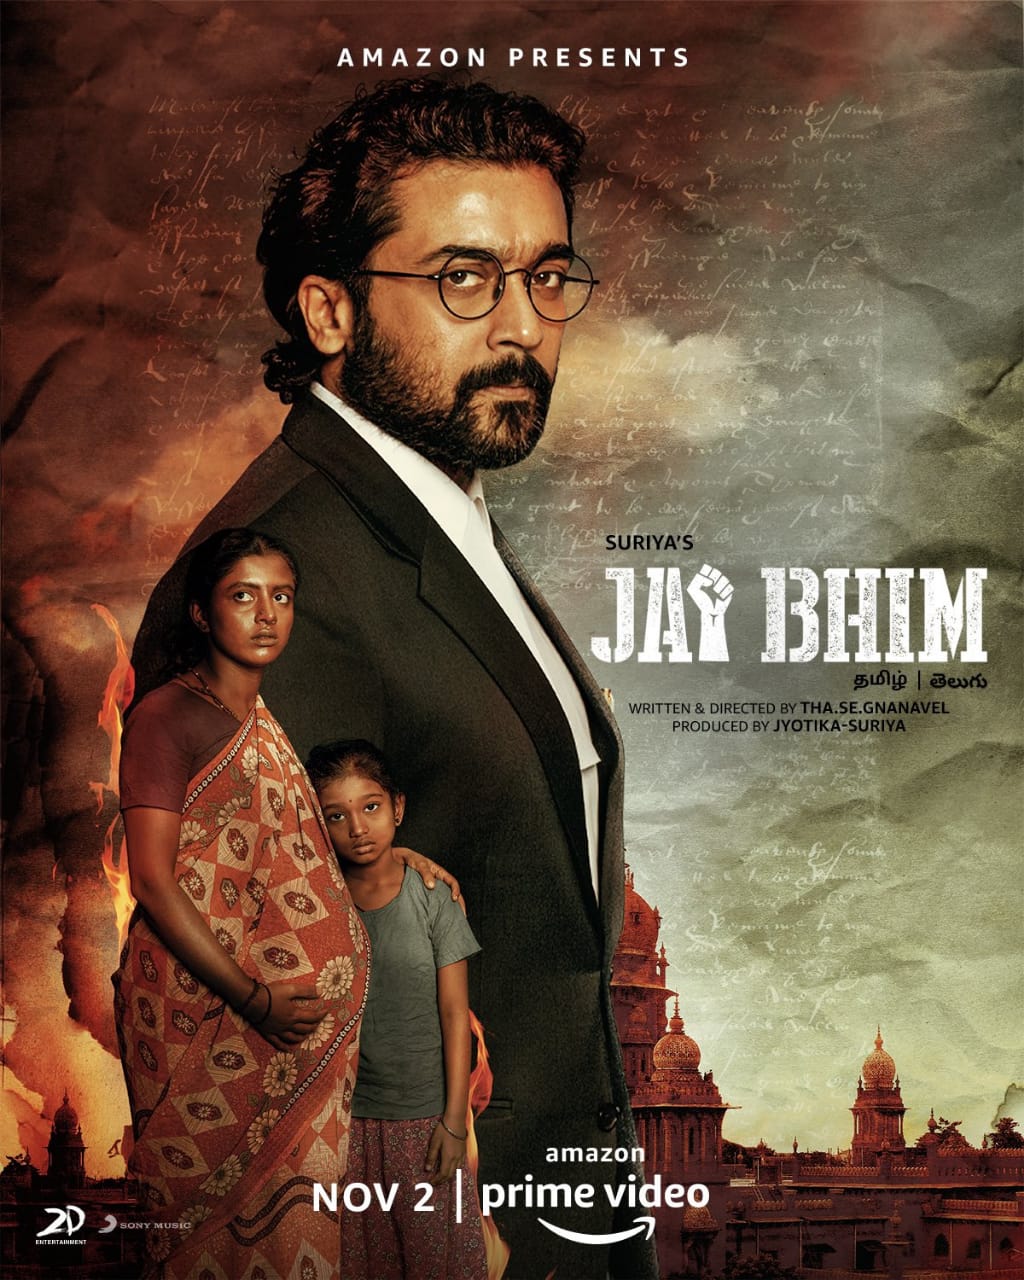 With a powerful poster comes a BIG announcement from Suriya’s Jai Bhim